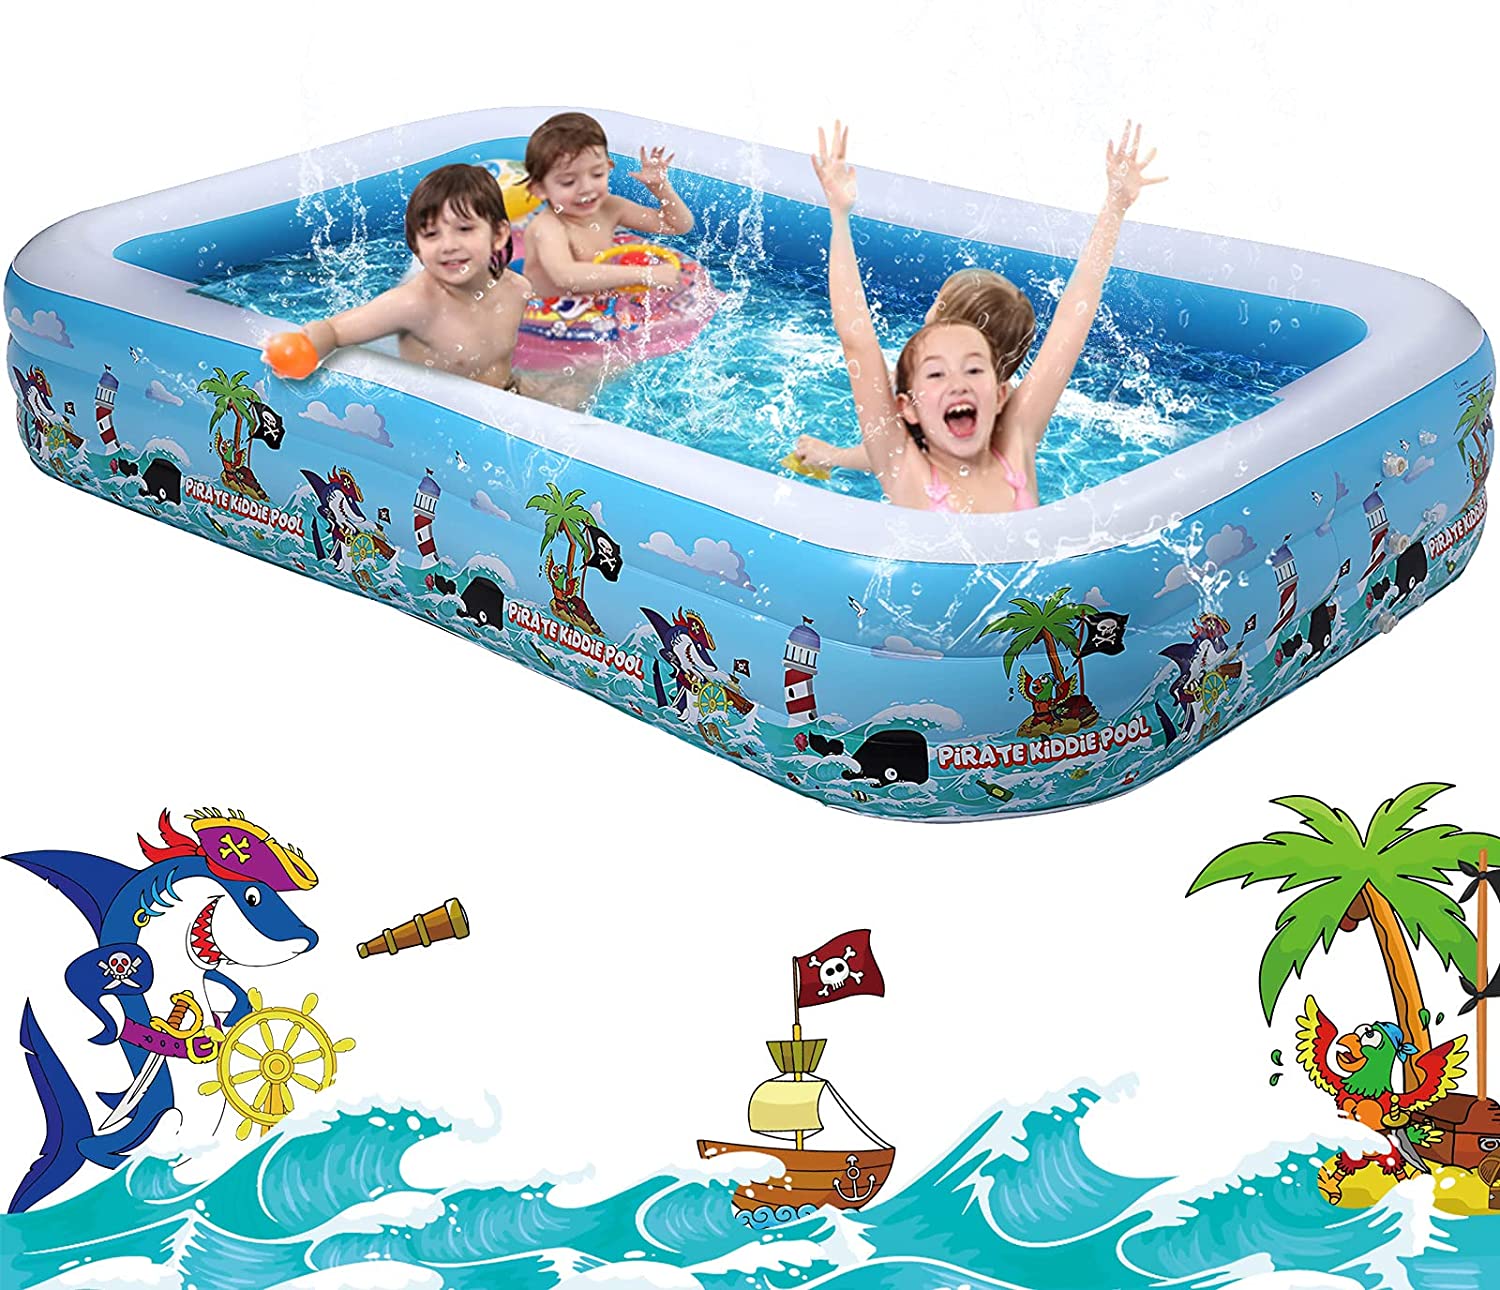 Happitry Inflatable Pool for Kids and Family